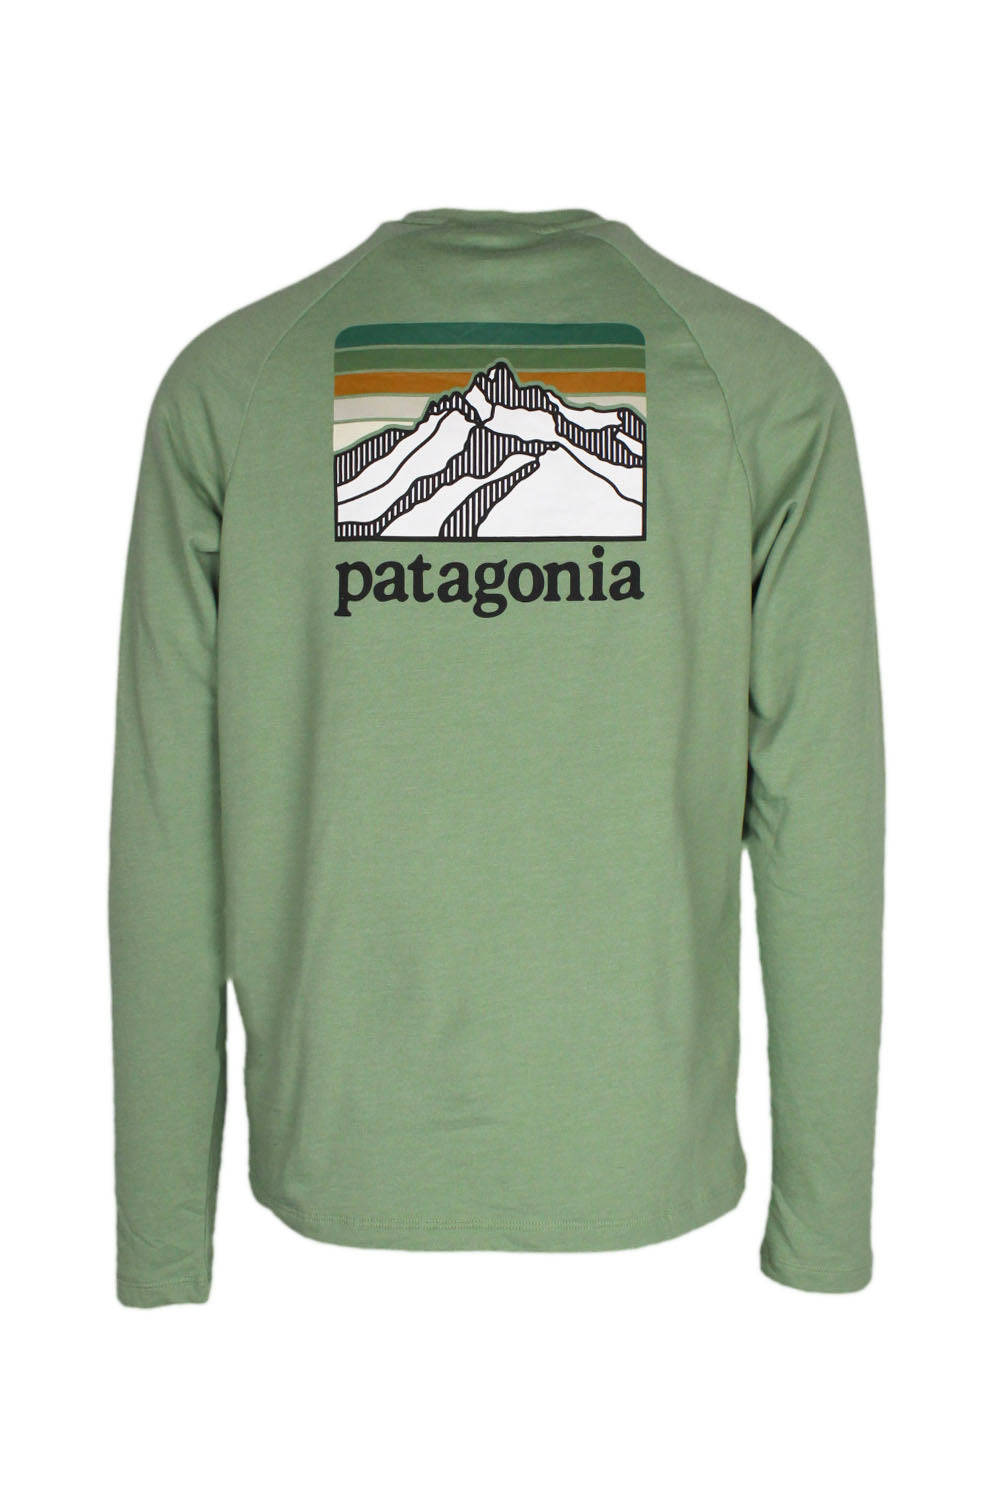 rear view with 'patagonia' logo graphic printed at back of sweatshirt.